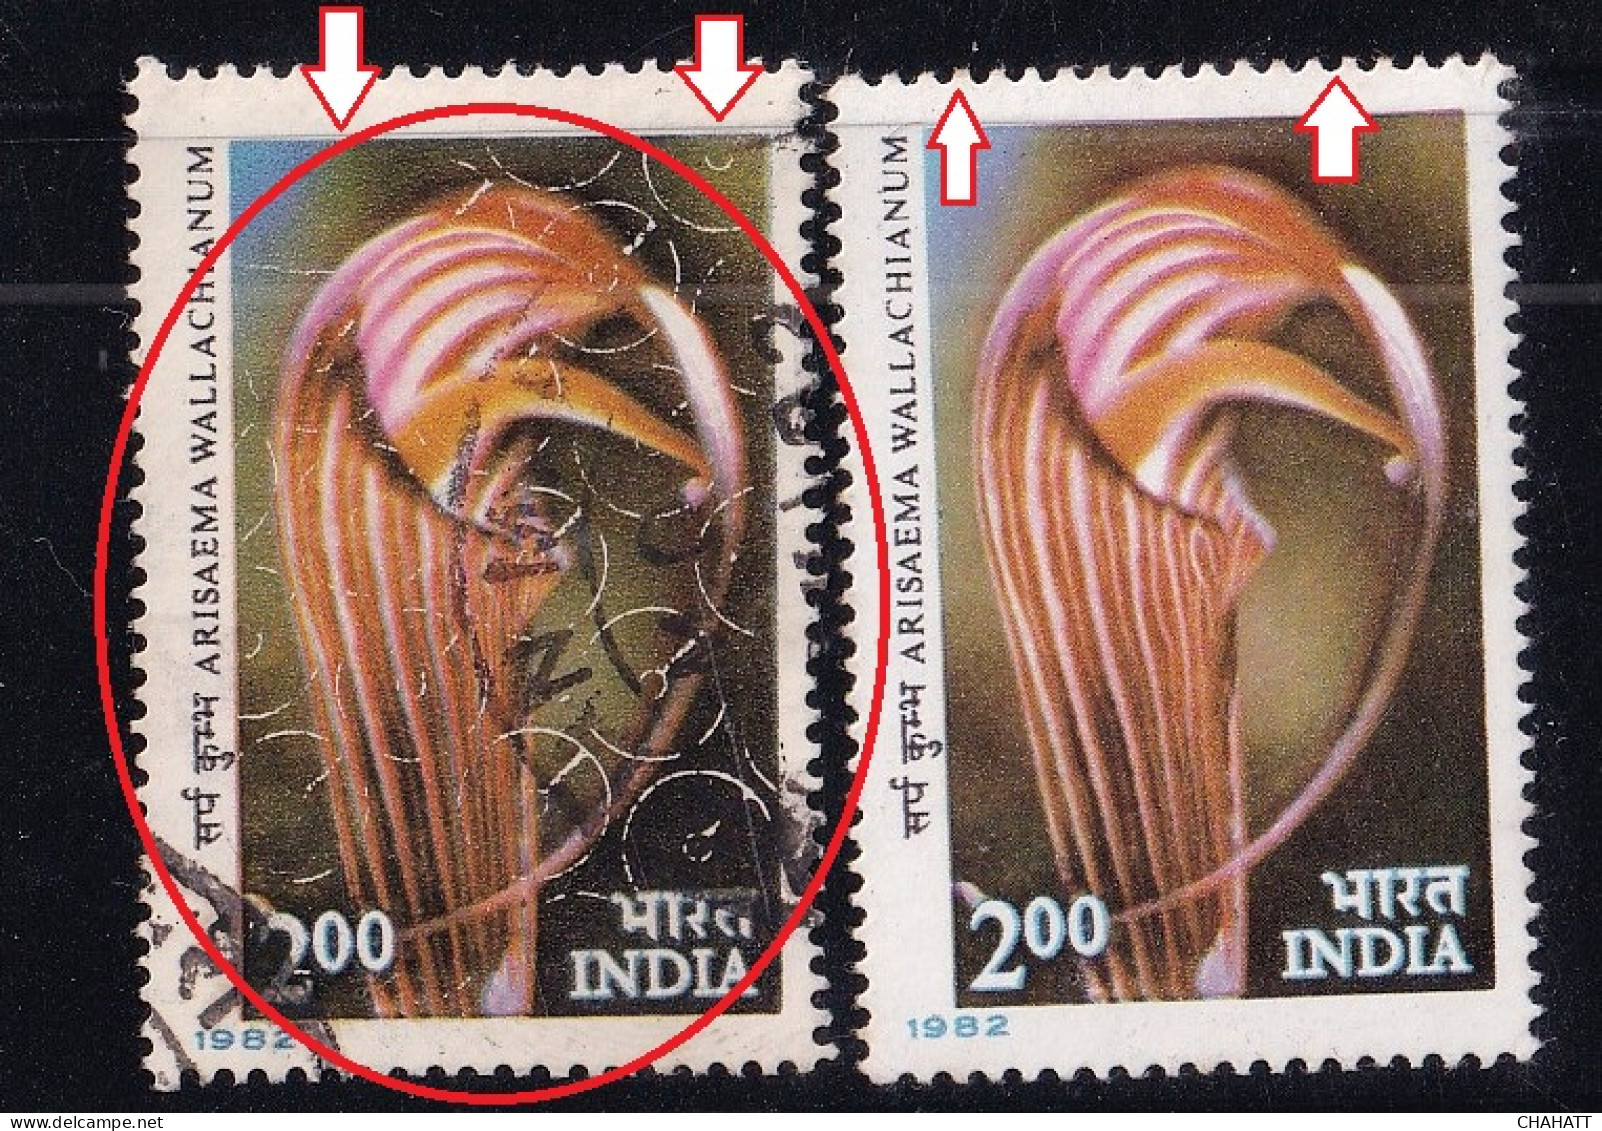 INDIA-1982-GIANT LILY- SARPAKUMBHA FLOWER- RARE ERROR-FU WITH MNH-EXTREMELY RARE - MNH- IE-61 - Errors, Freaks & Oddities (EFO)